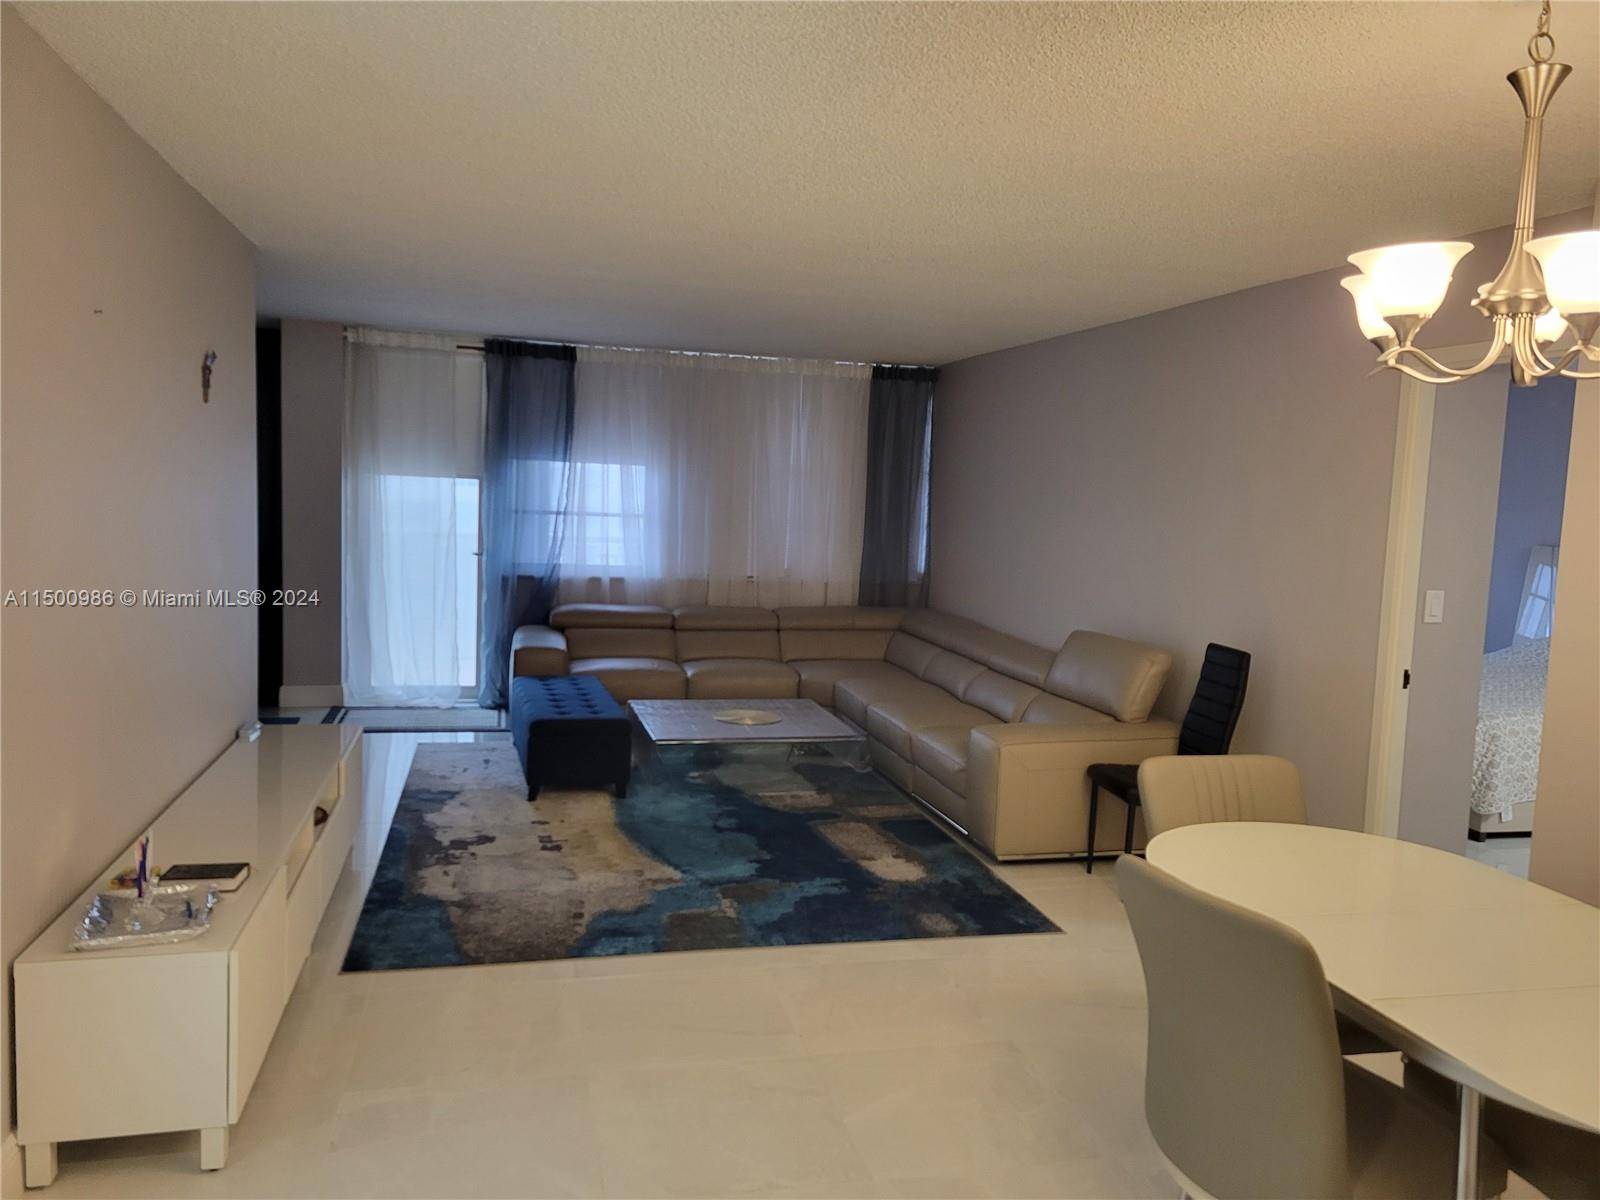 Beautiful, fully renovated, porcelain tiles throughout, ss appliances, new bathrooms, fully furnished.